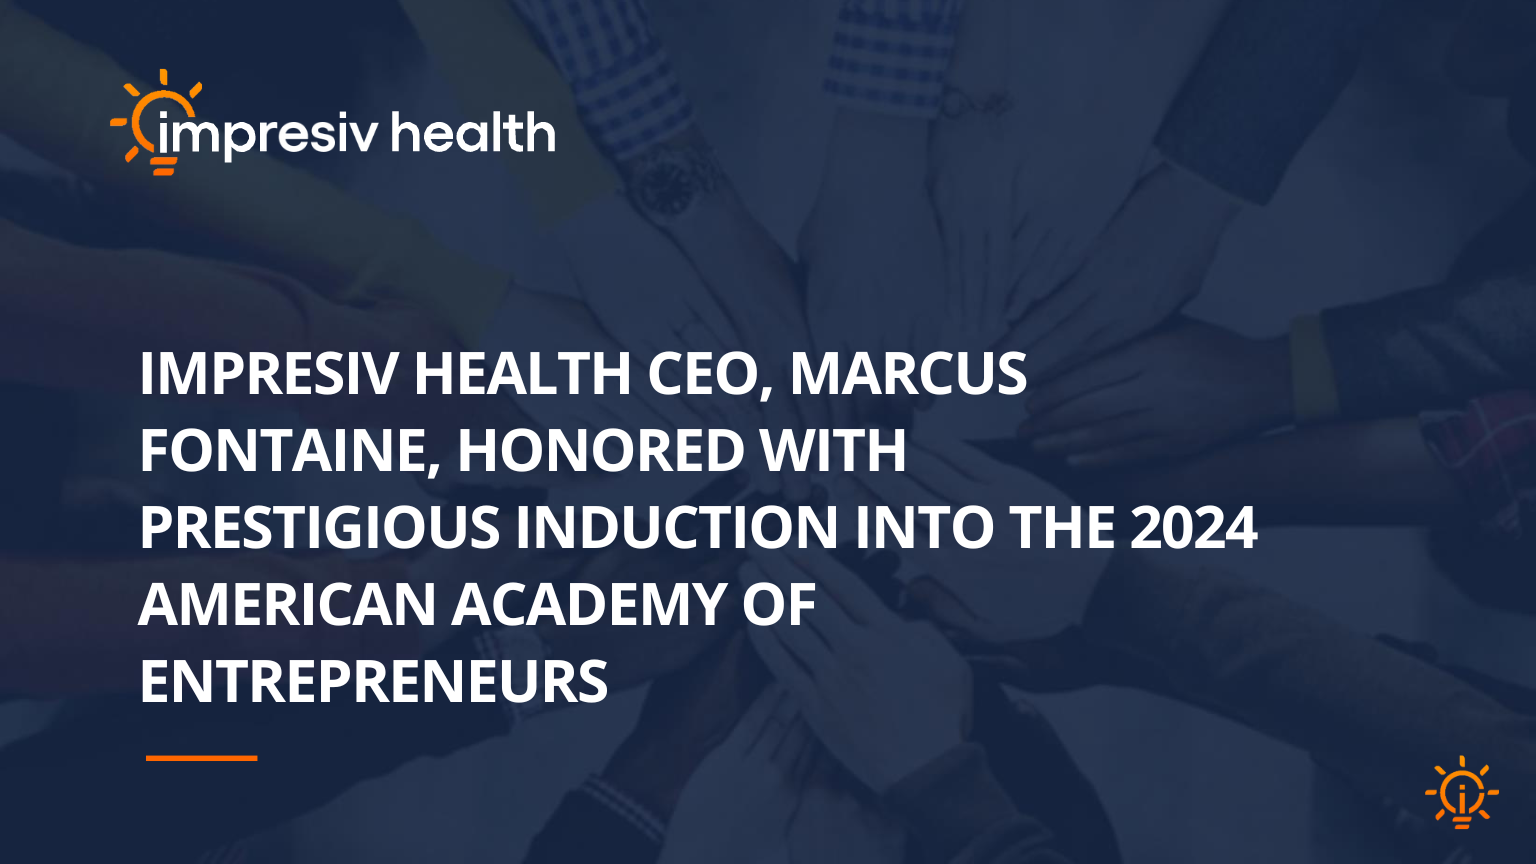 Impresiv Health CEO, Marcus Fontaine, Honored with Prestigious Induction into the 2024 American Academy of Entrepreneurs